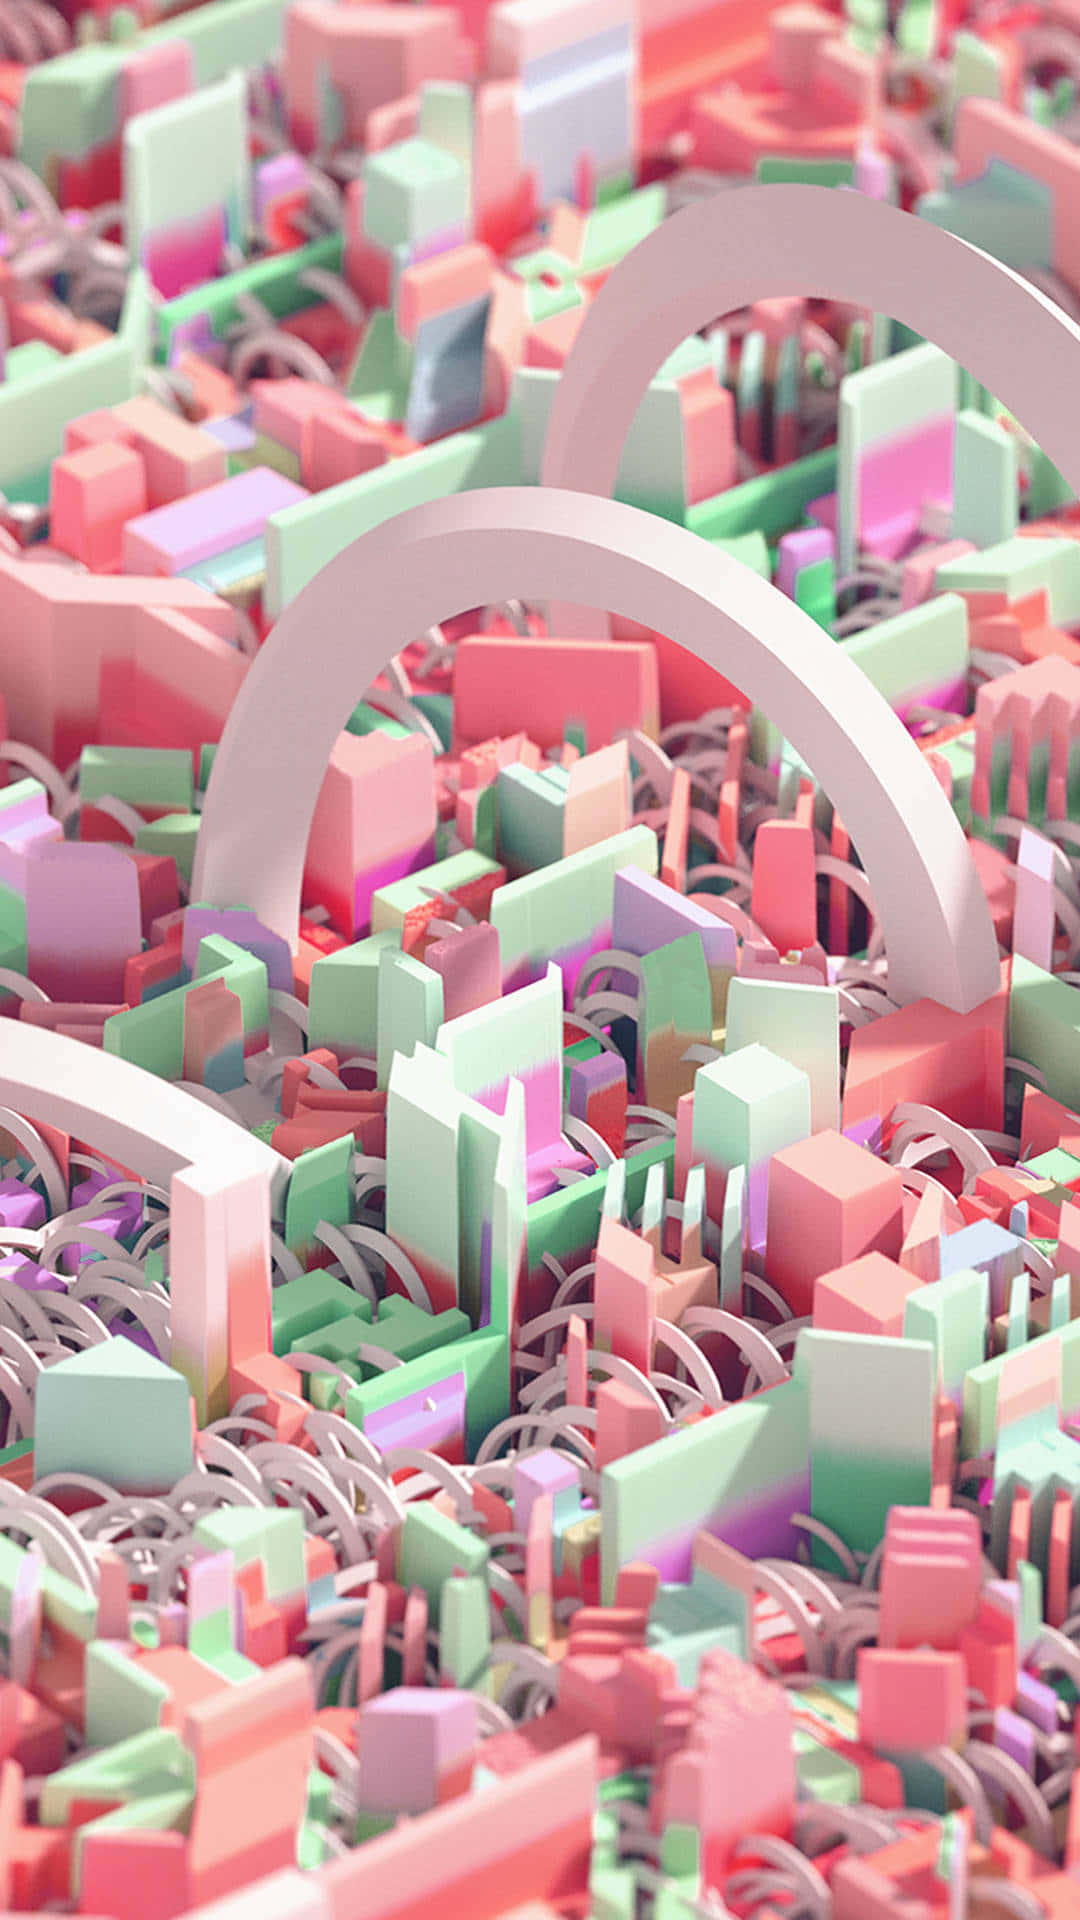 A Pink And Green 3d Image Wallpaper